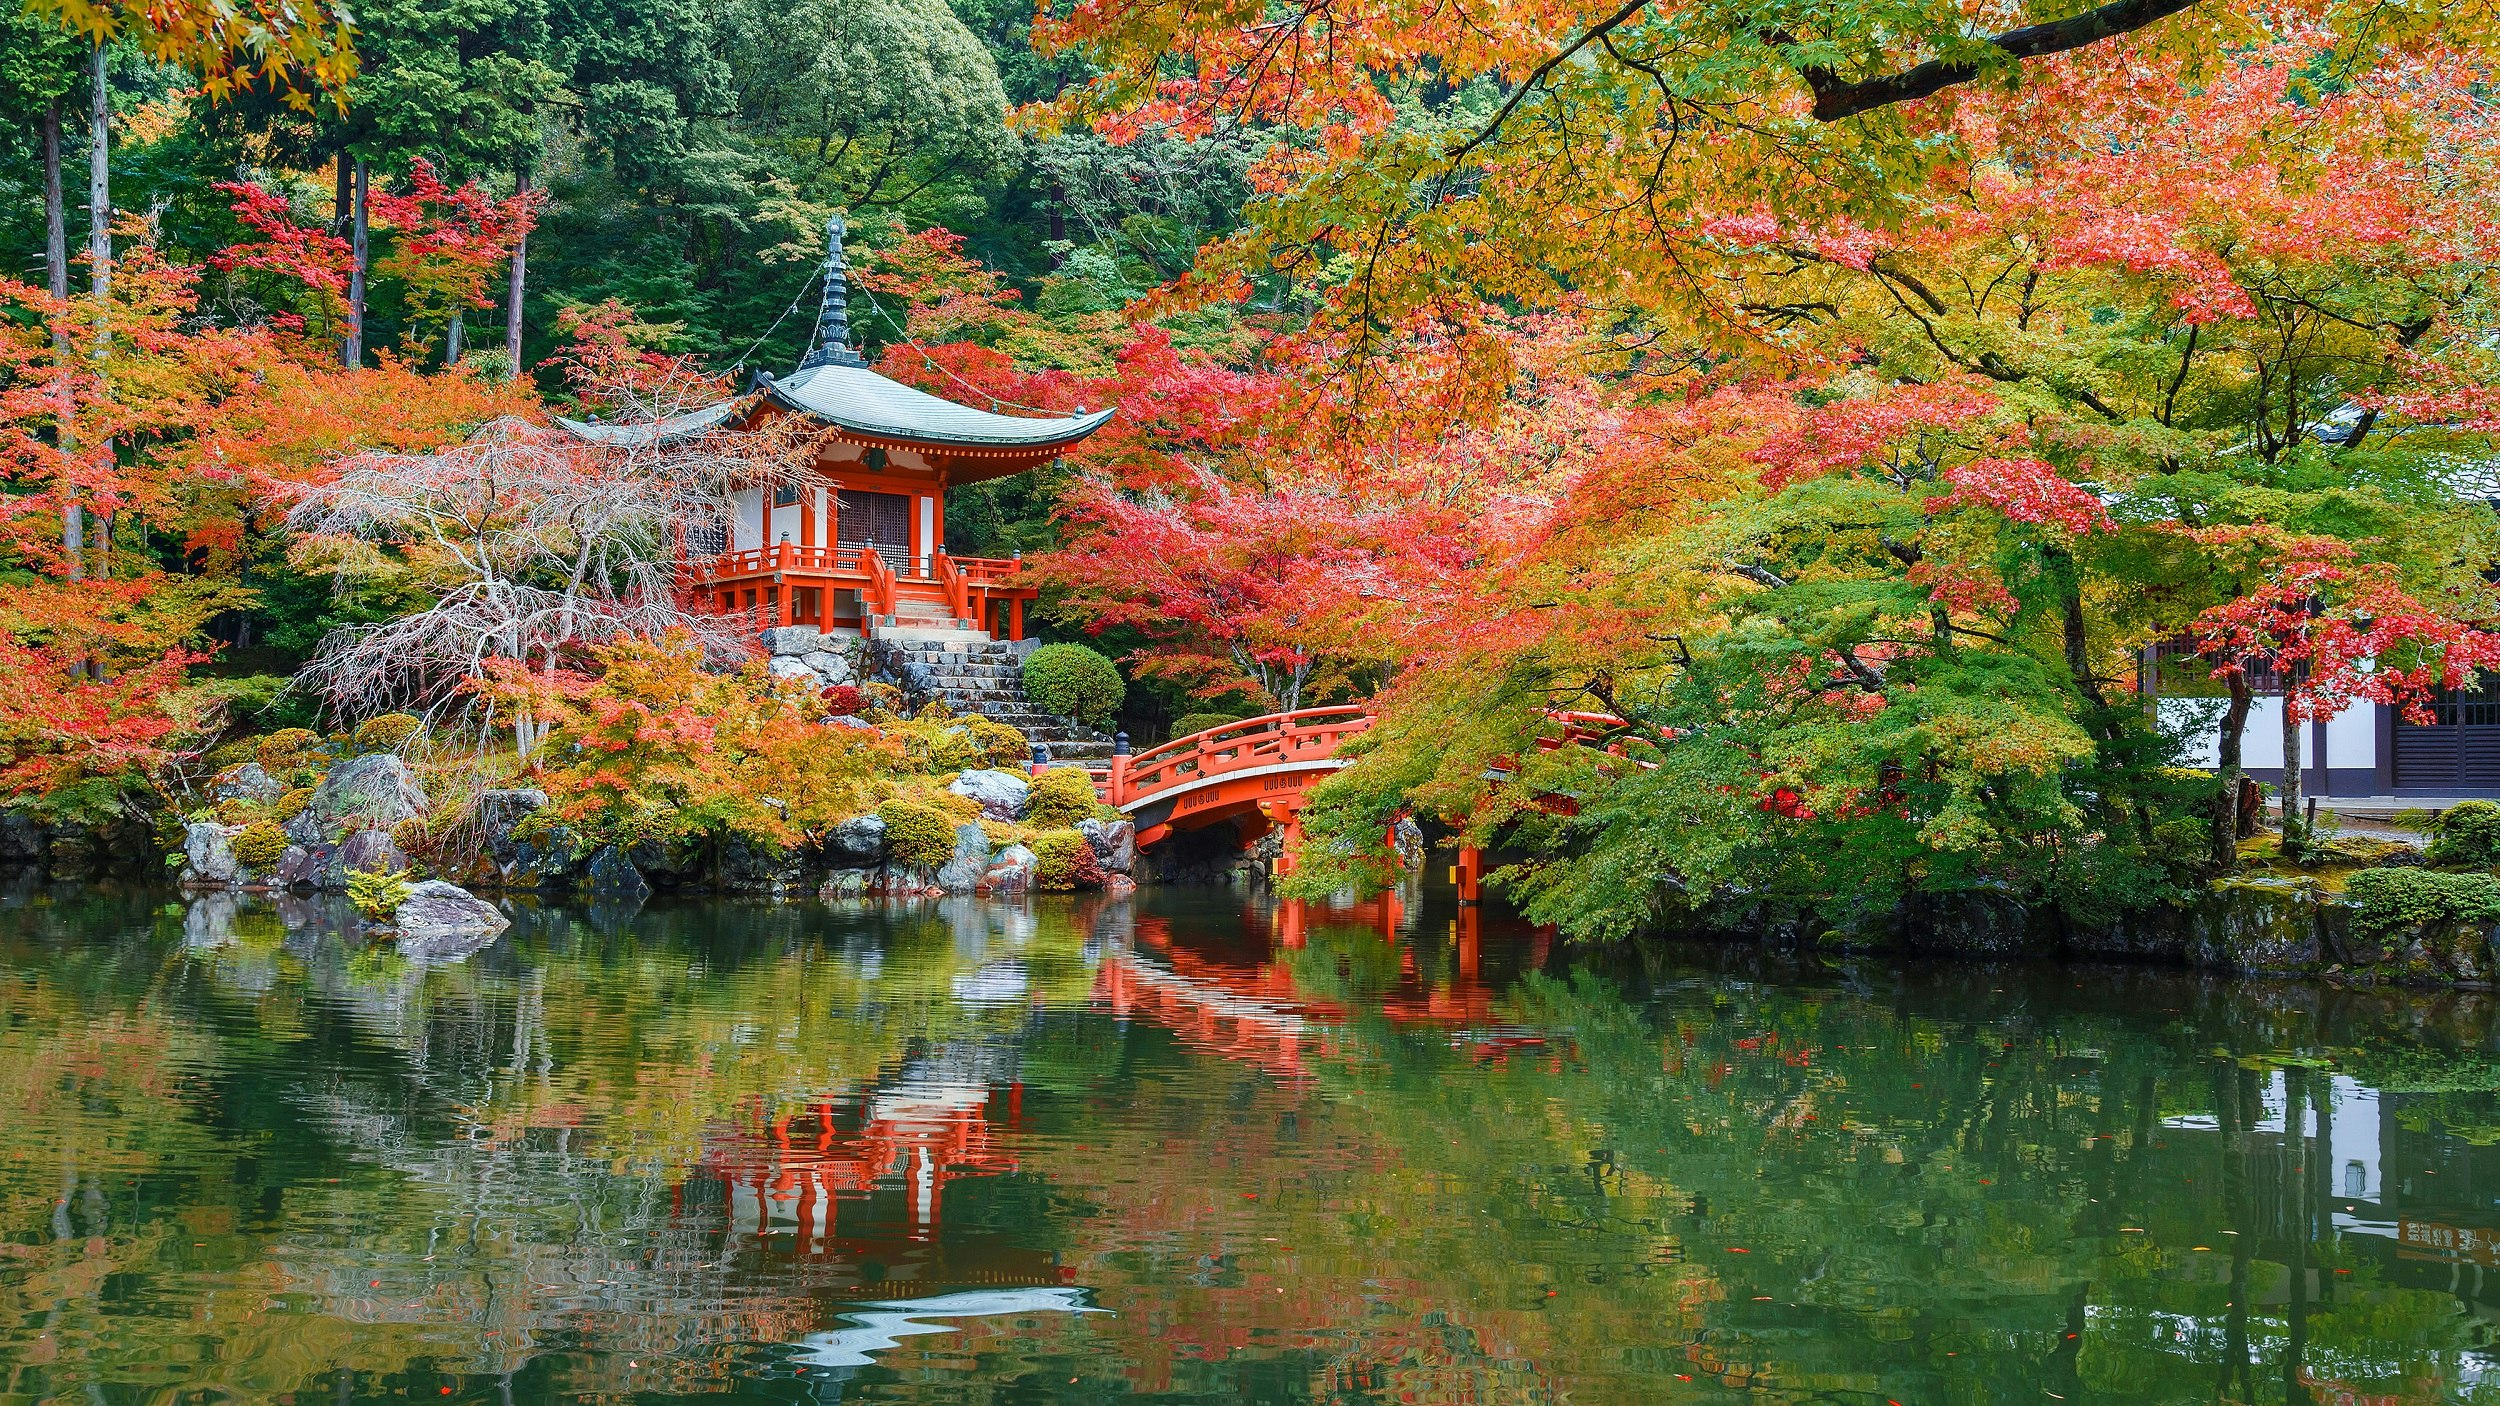 Daigo-ji temple and a wooden bridge over a lake surrounded by reds, yellows and greens of trees and shrubs changing to fall colors